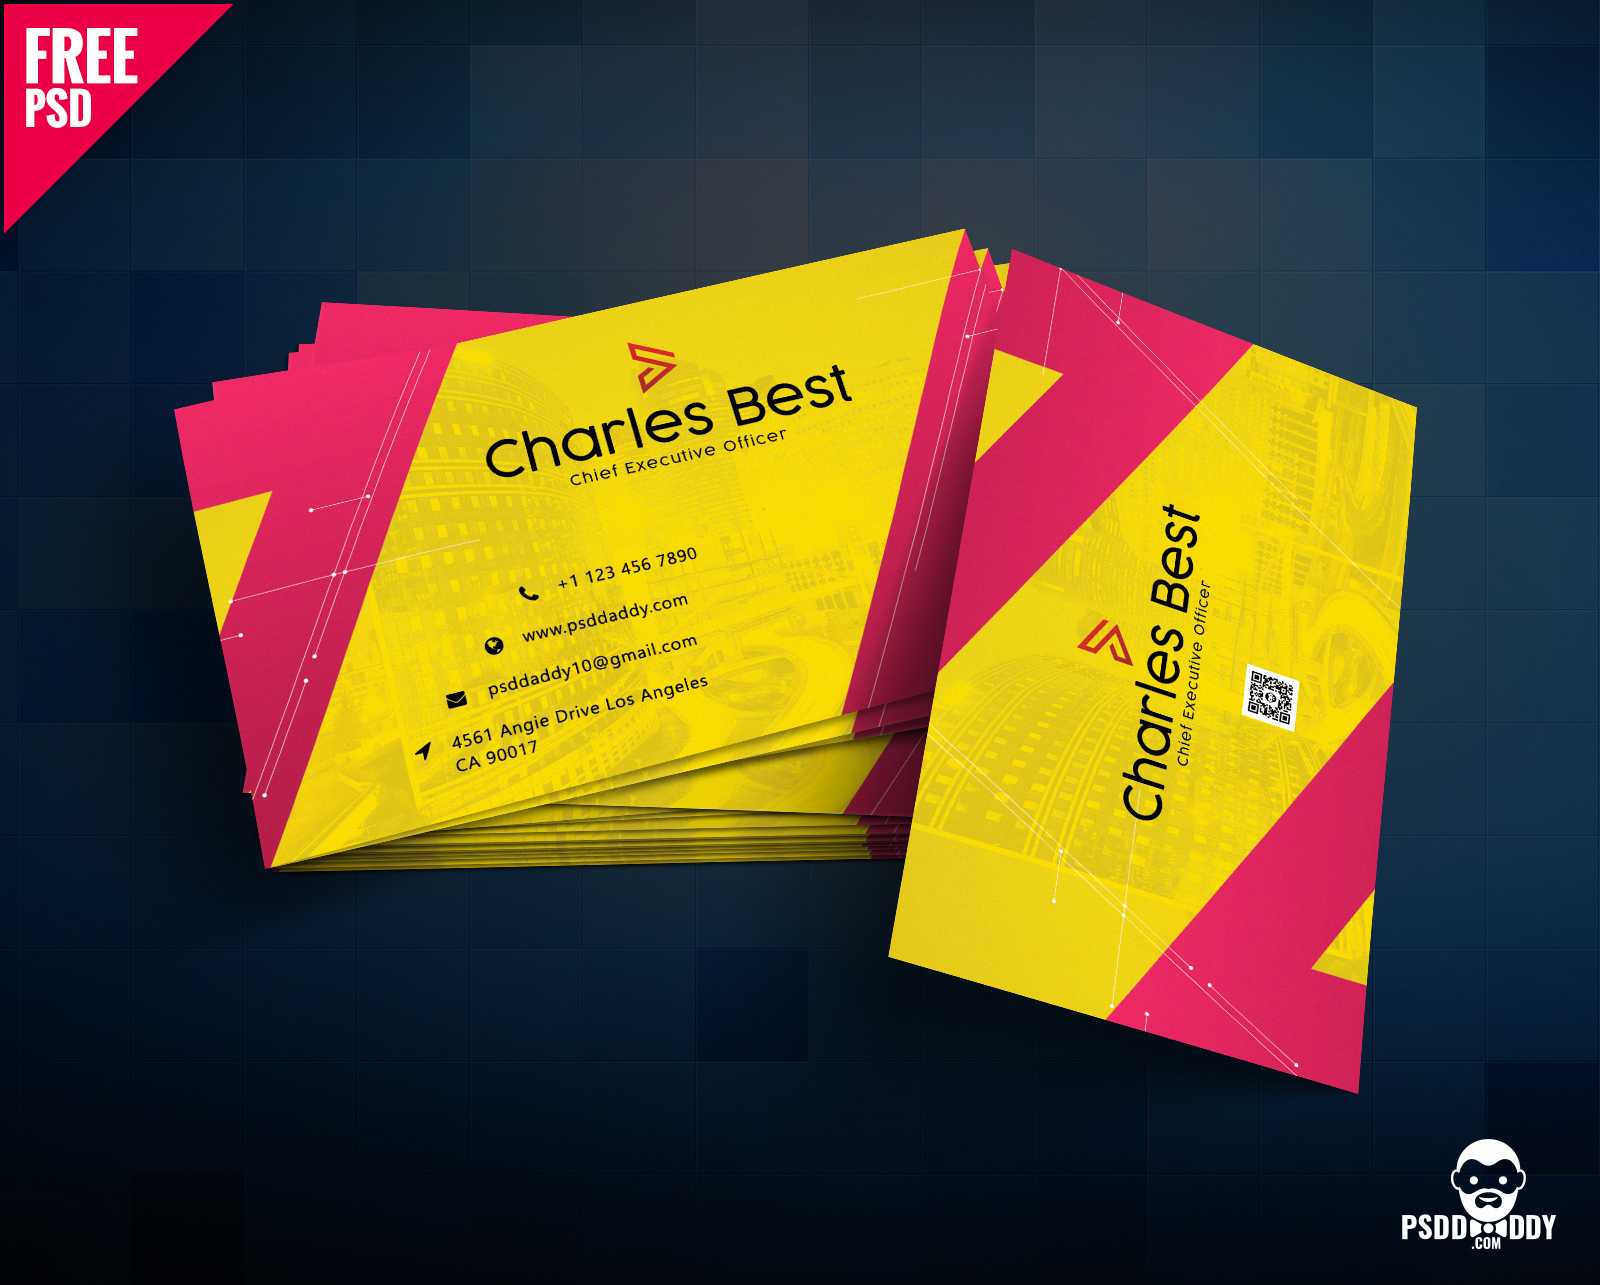 Download] Creative Business Card Free Psd | Psddaddy In Free Business Card Templates In Psd Format